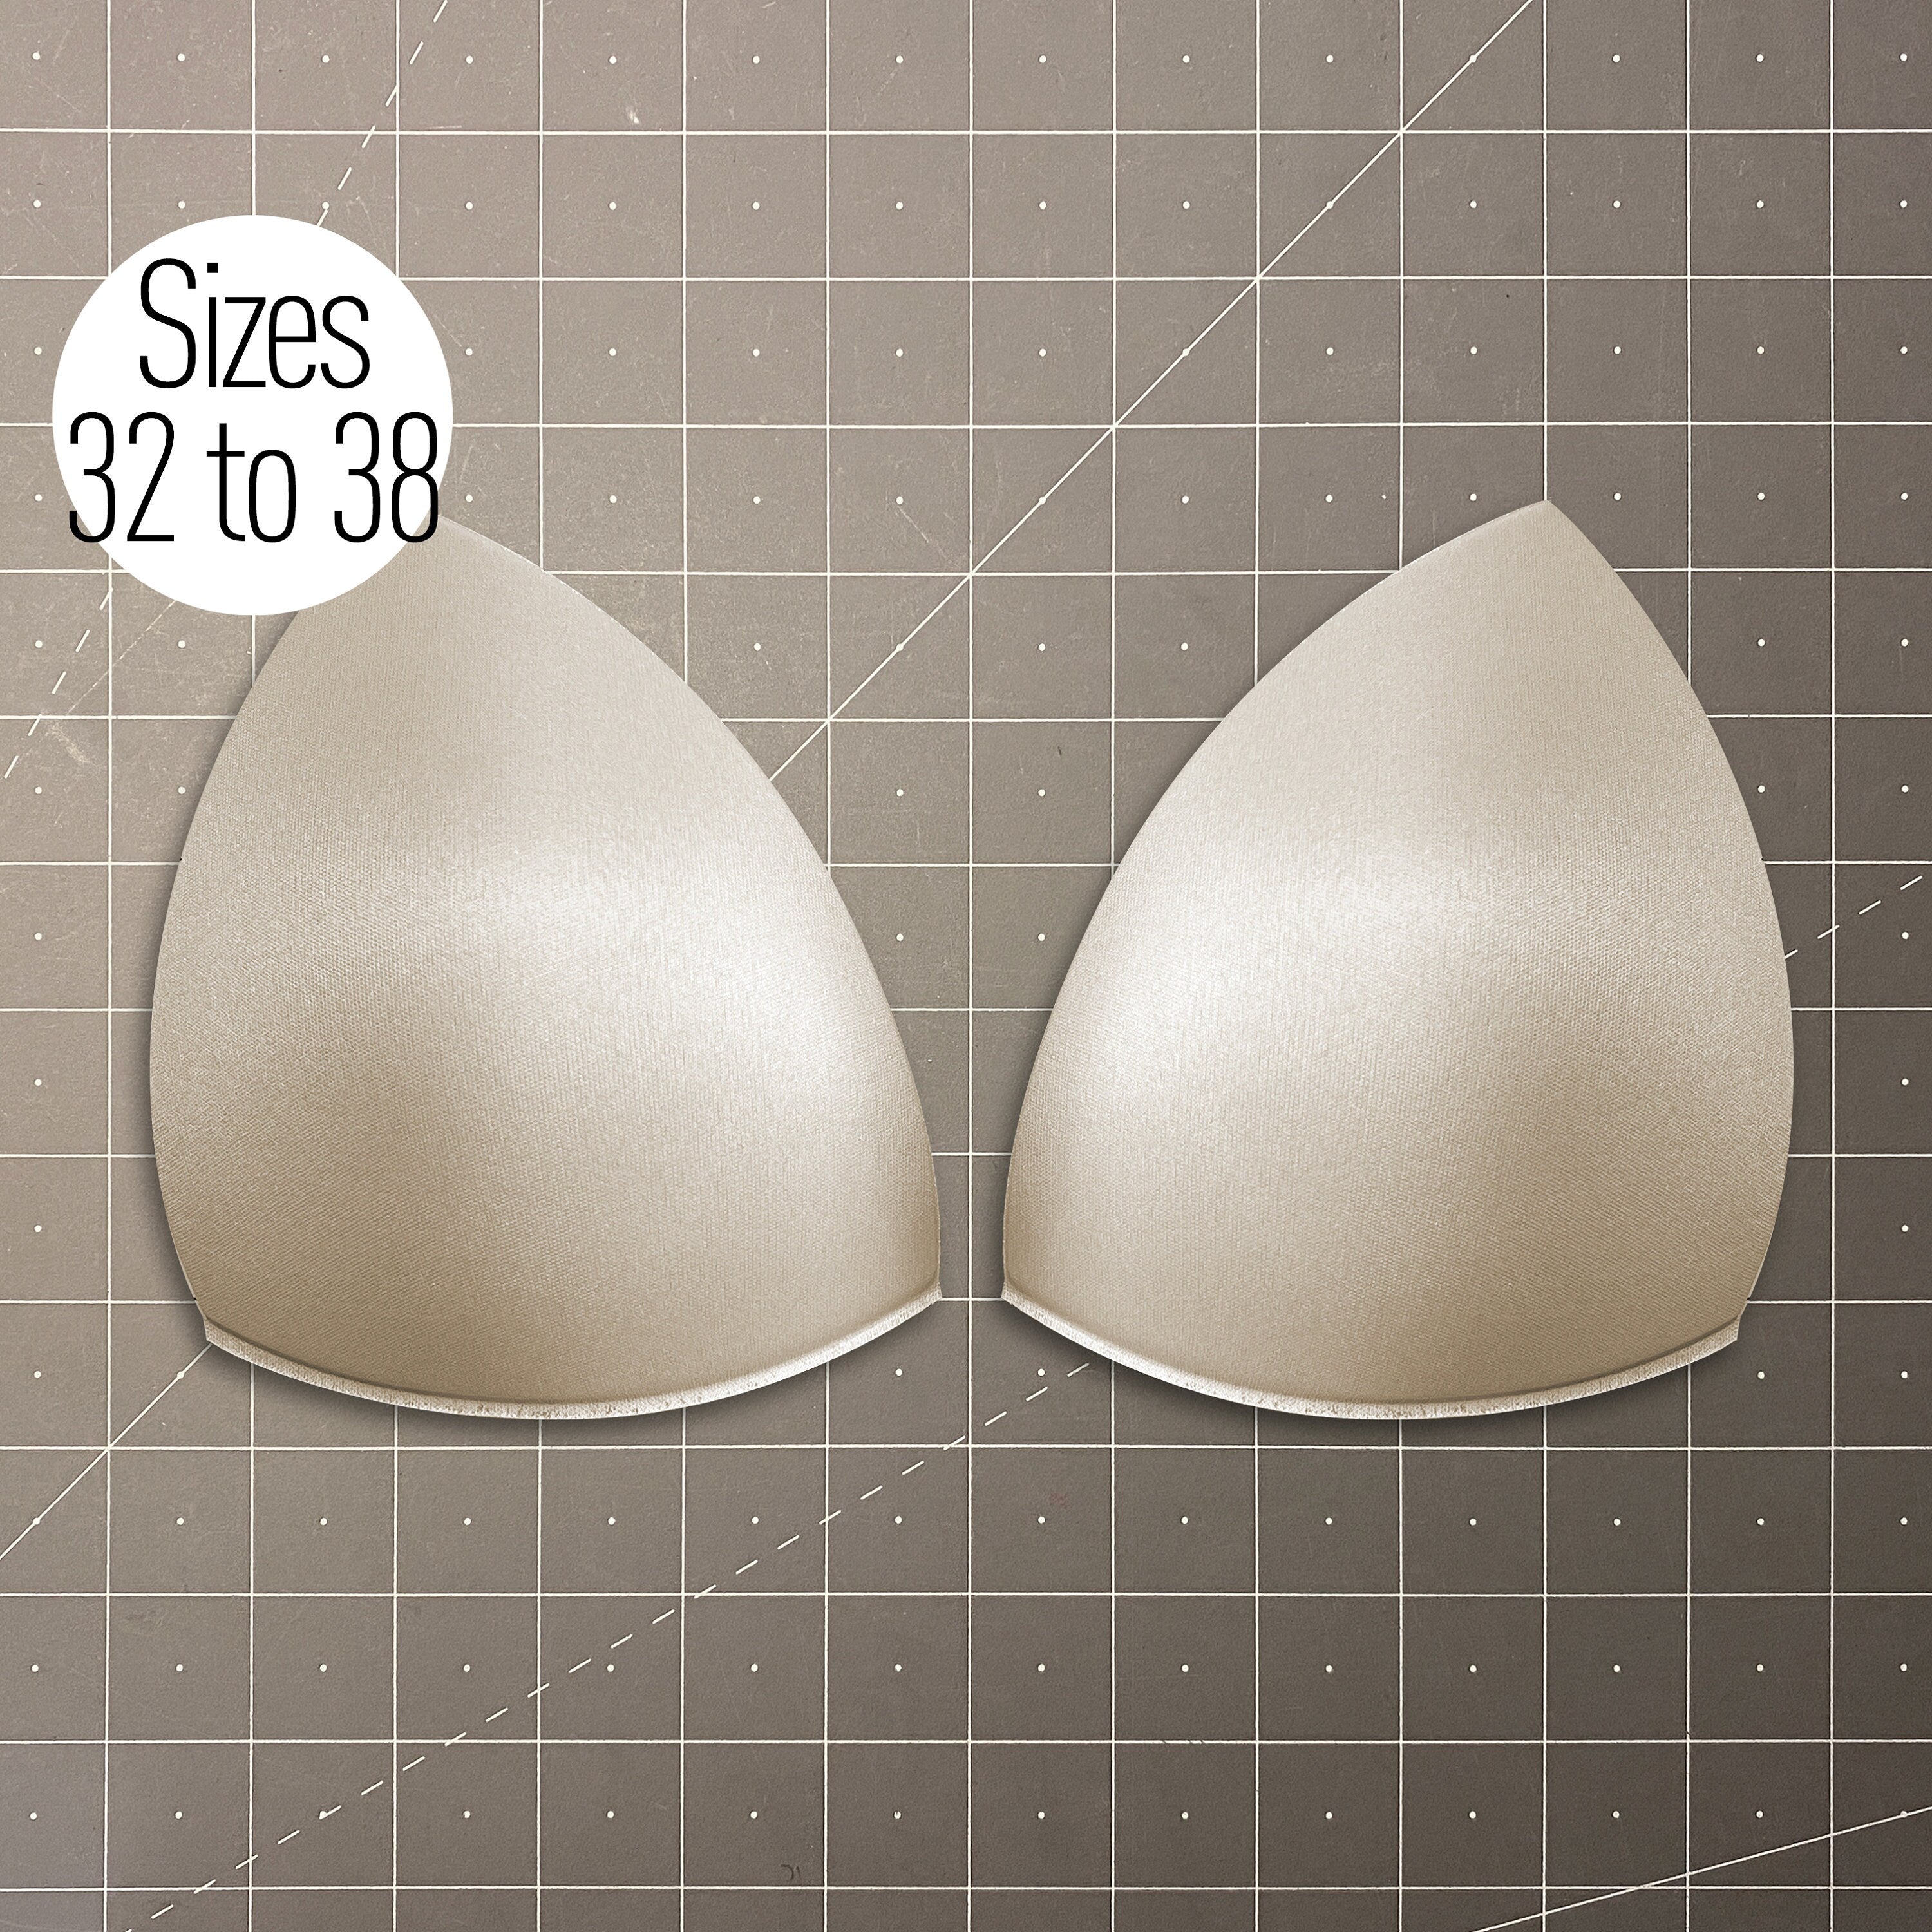 Push Up Triangular Shaped Style 2, Bra Cups or Sewn In for Lingerie, Swimwear, Dance Costumes, Dresses - Sizes 32-38-Stitch Love Studio